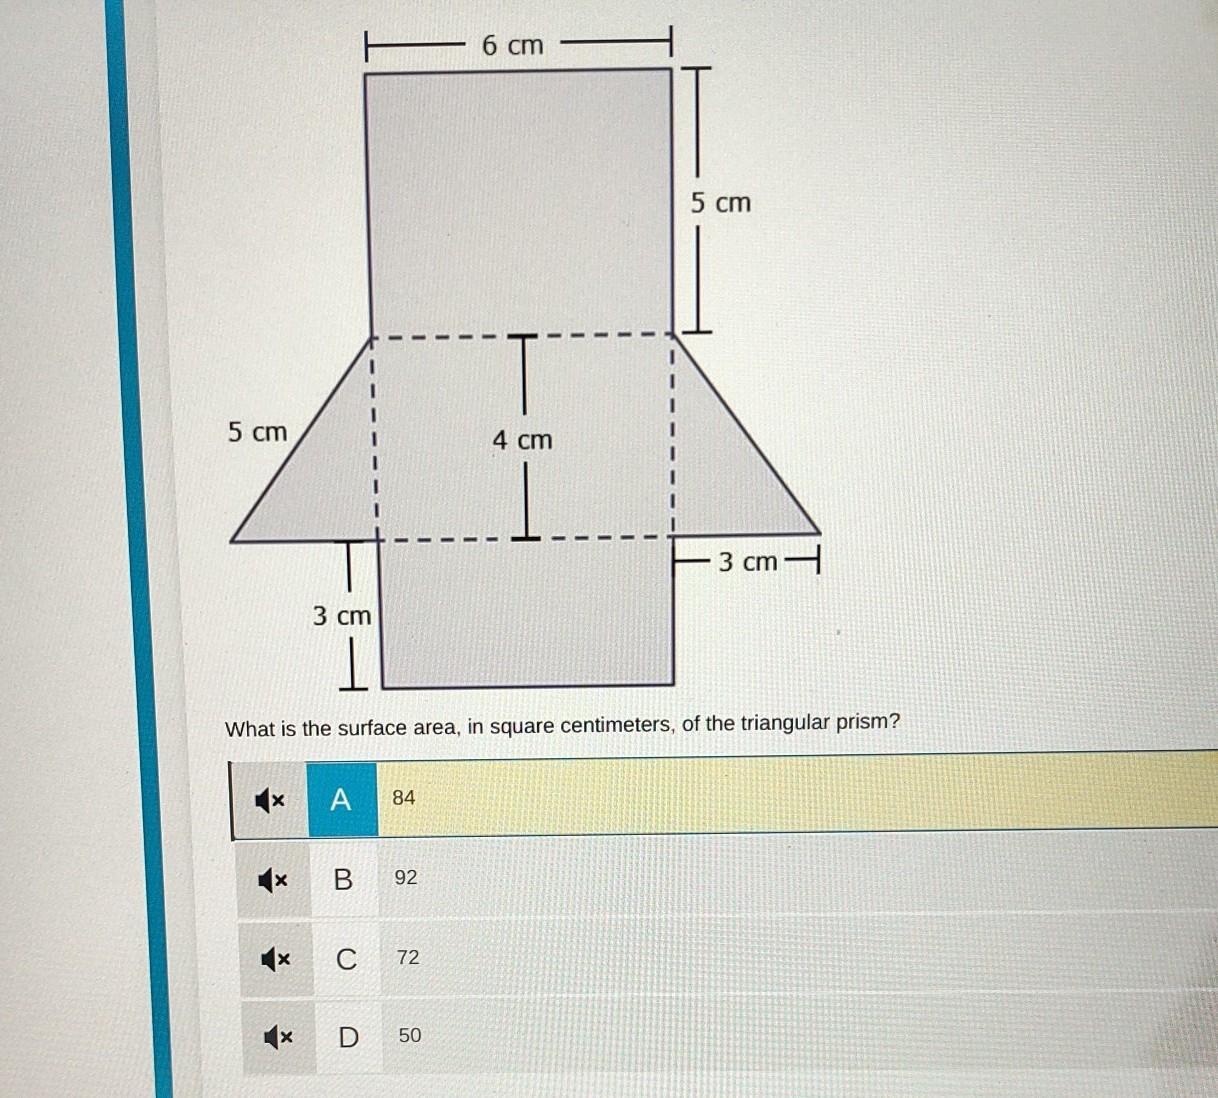 5 Cm X 3 Cm X A 84 What Is The Surface Area, In Square Centimeters, Of The Triangular Prism? B 92 C 72